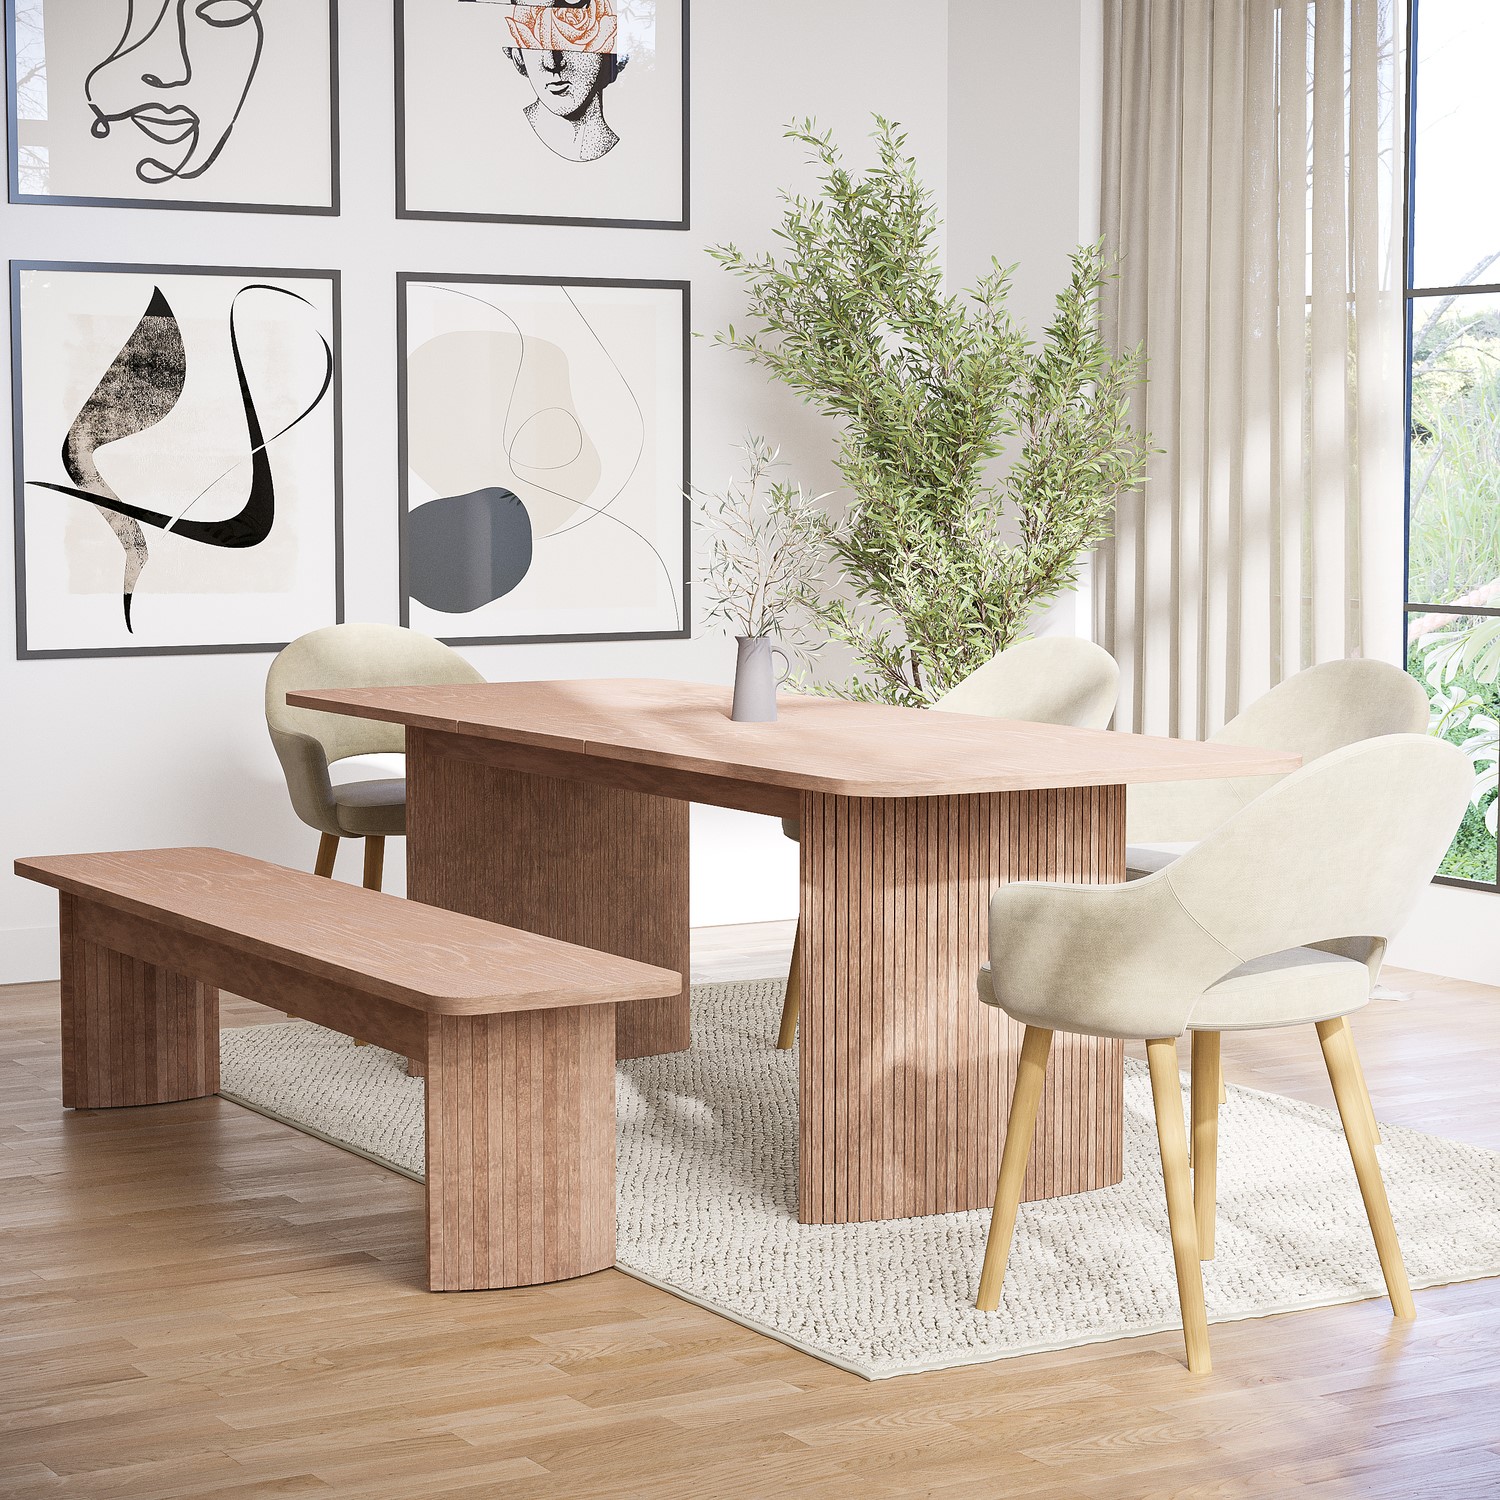 Photo of Extendable rectangle oak dining table with 4 beige fabric dining chairs & large oak dining bench - seats 6 - jarel